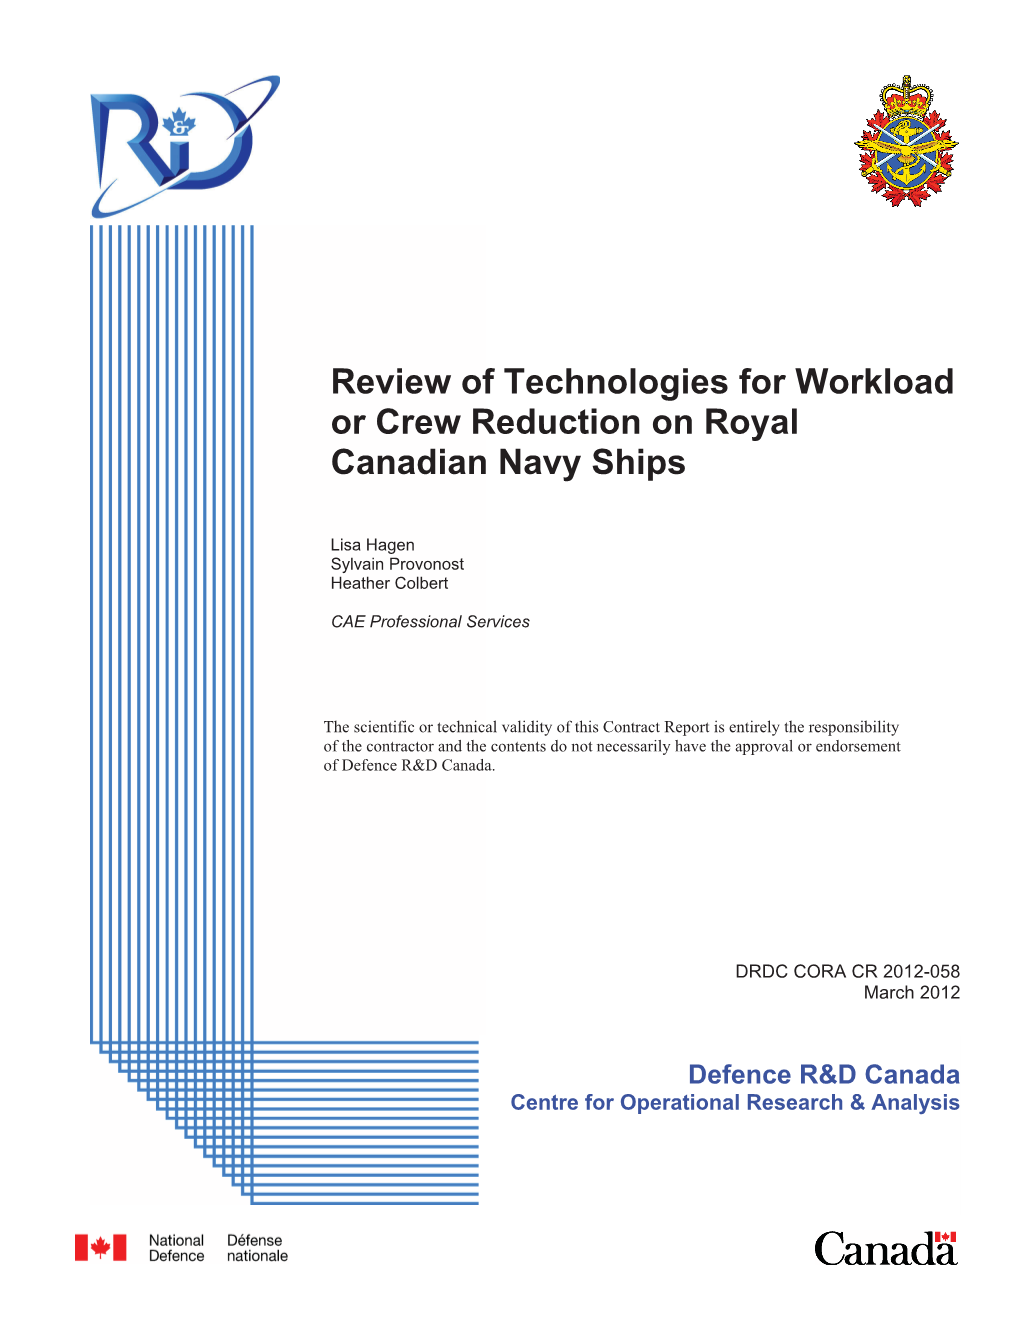 Review of Technologies for Workload Or Crew Reduction on Royal Canadian Navy Ships